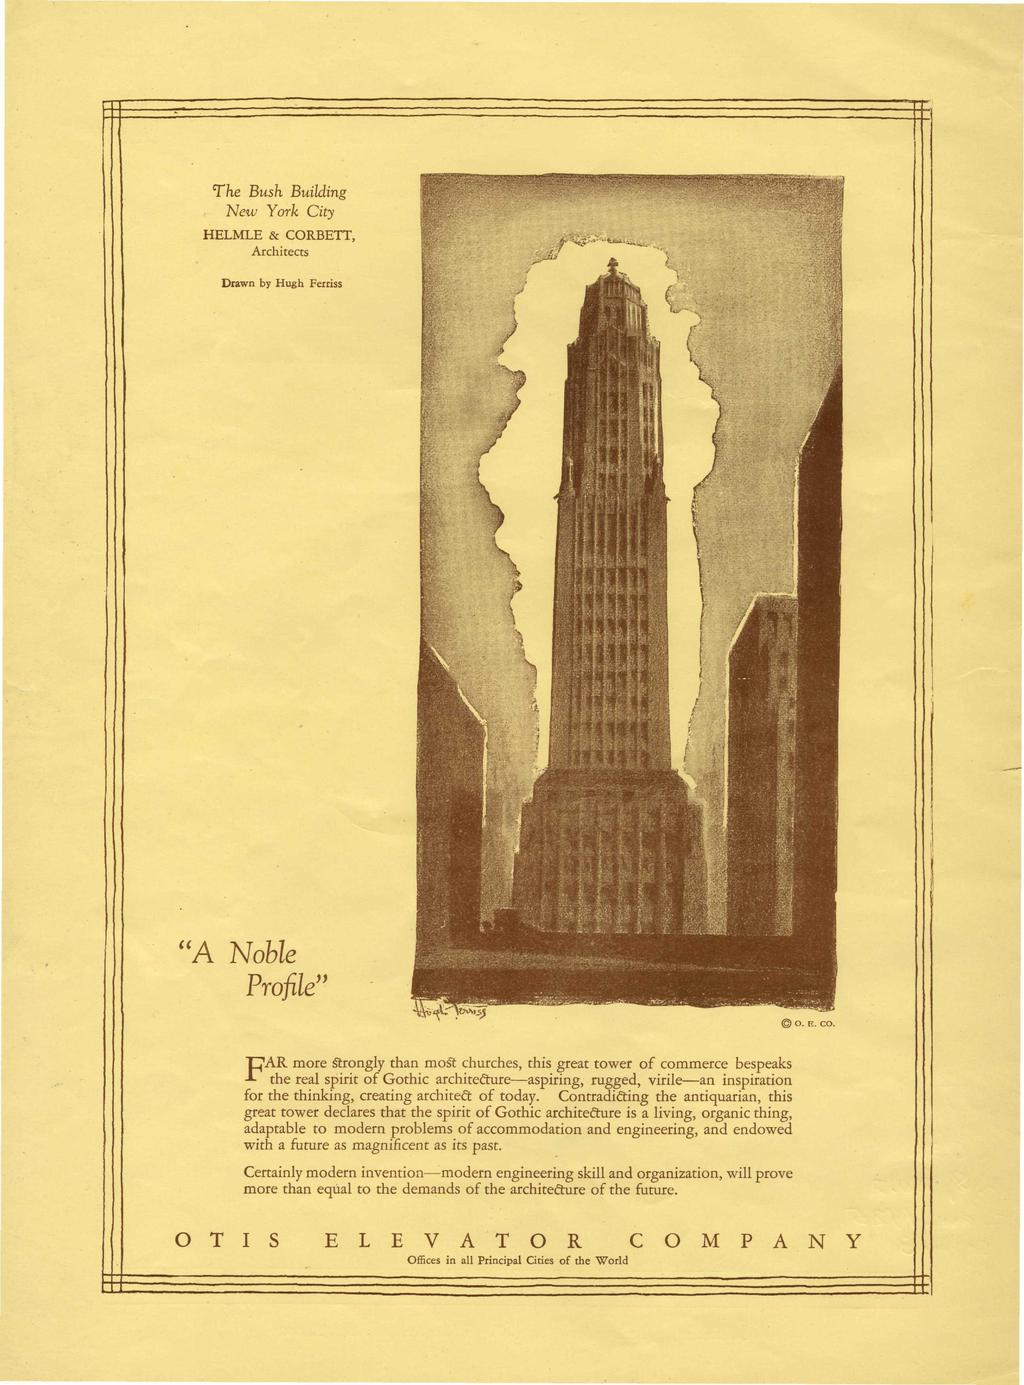 The Bush Building New York City HELMLE & CORBETT, Architects Drawn by Hugh Ferriss "A Noble Profile" AR more Strongly than most churches, this great tower of commerce bespeaks F the real spirit of